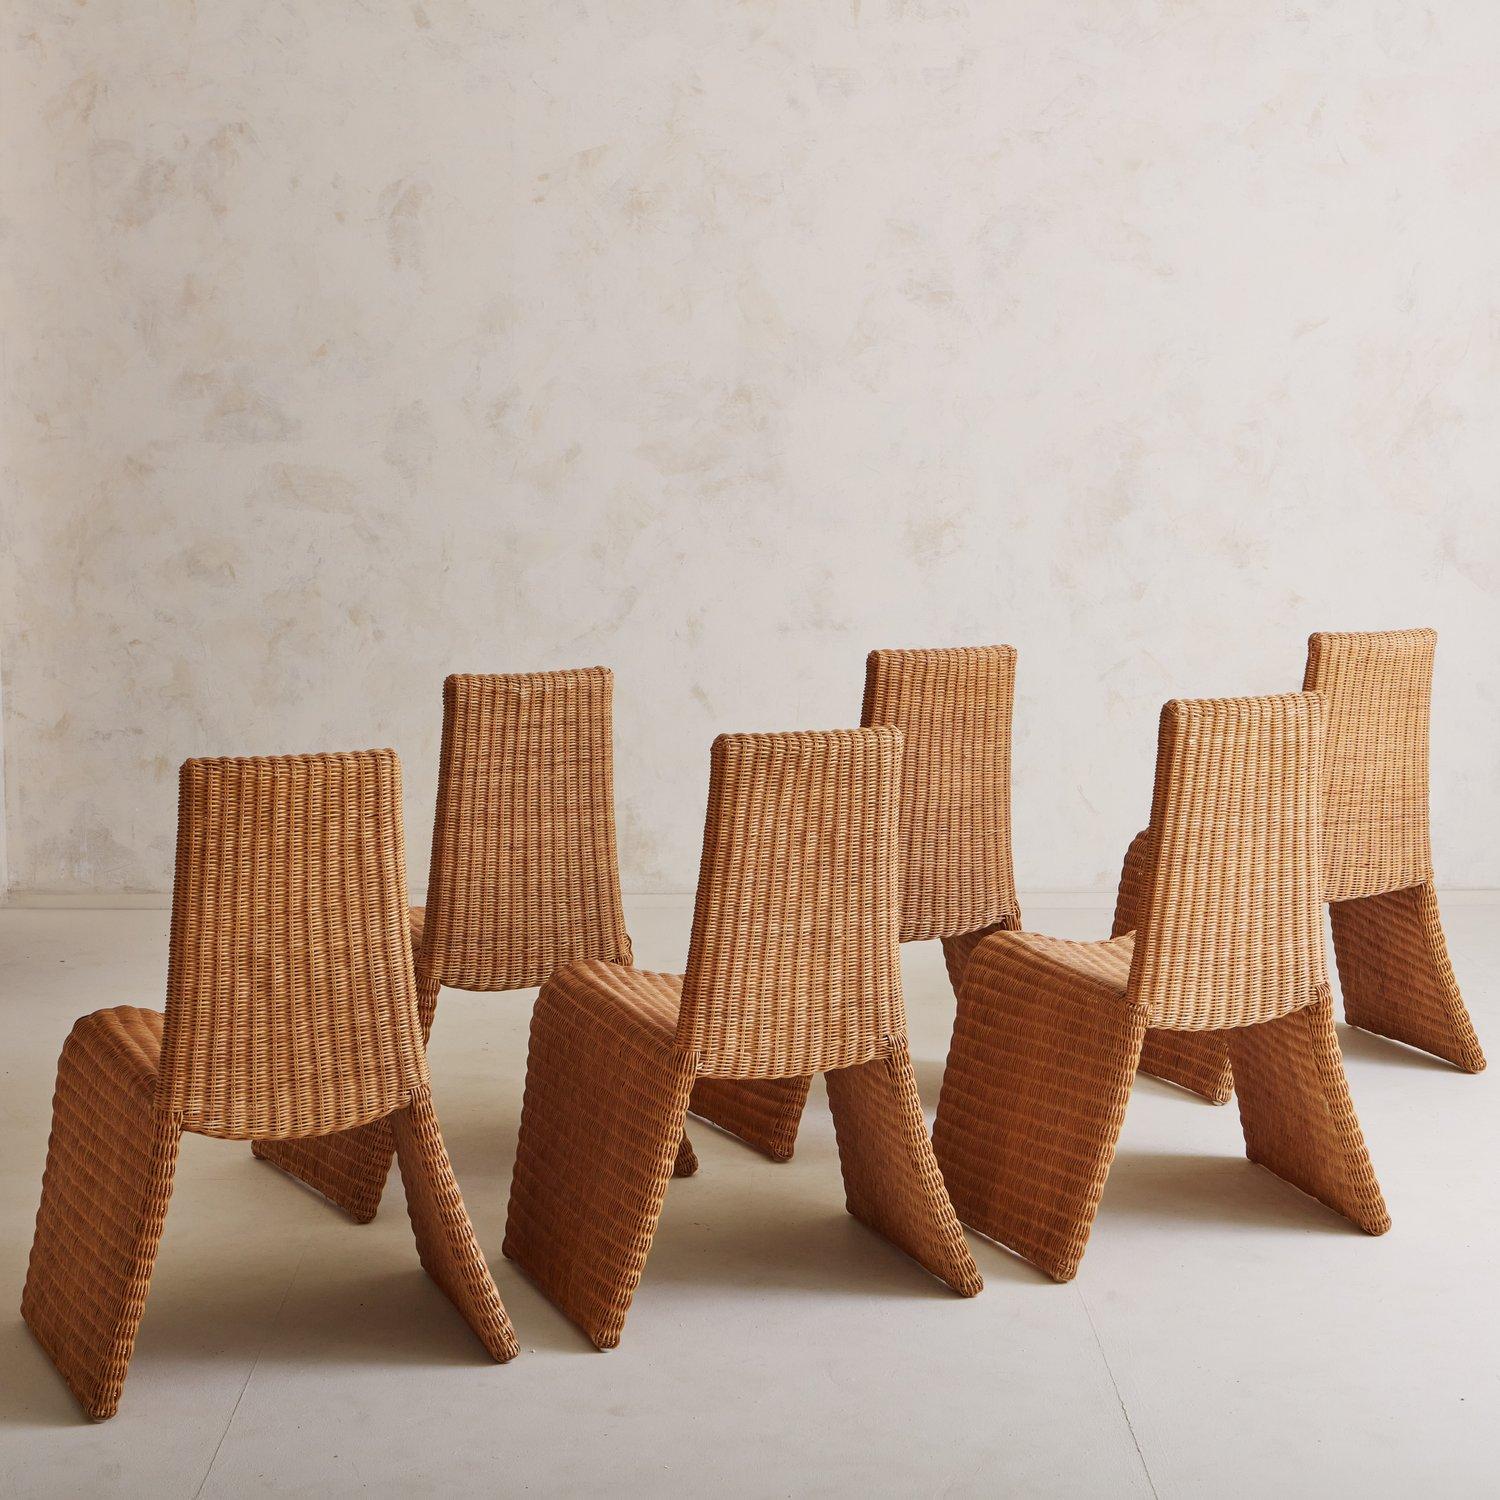 Set of 5 Sculptural Wicker Dining Chairs, Spain 20th Century 3